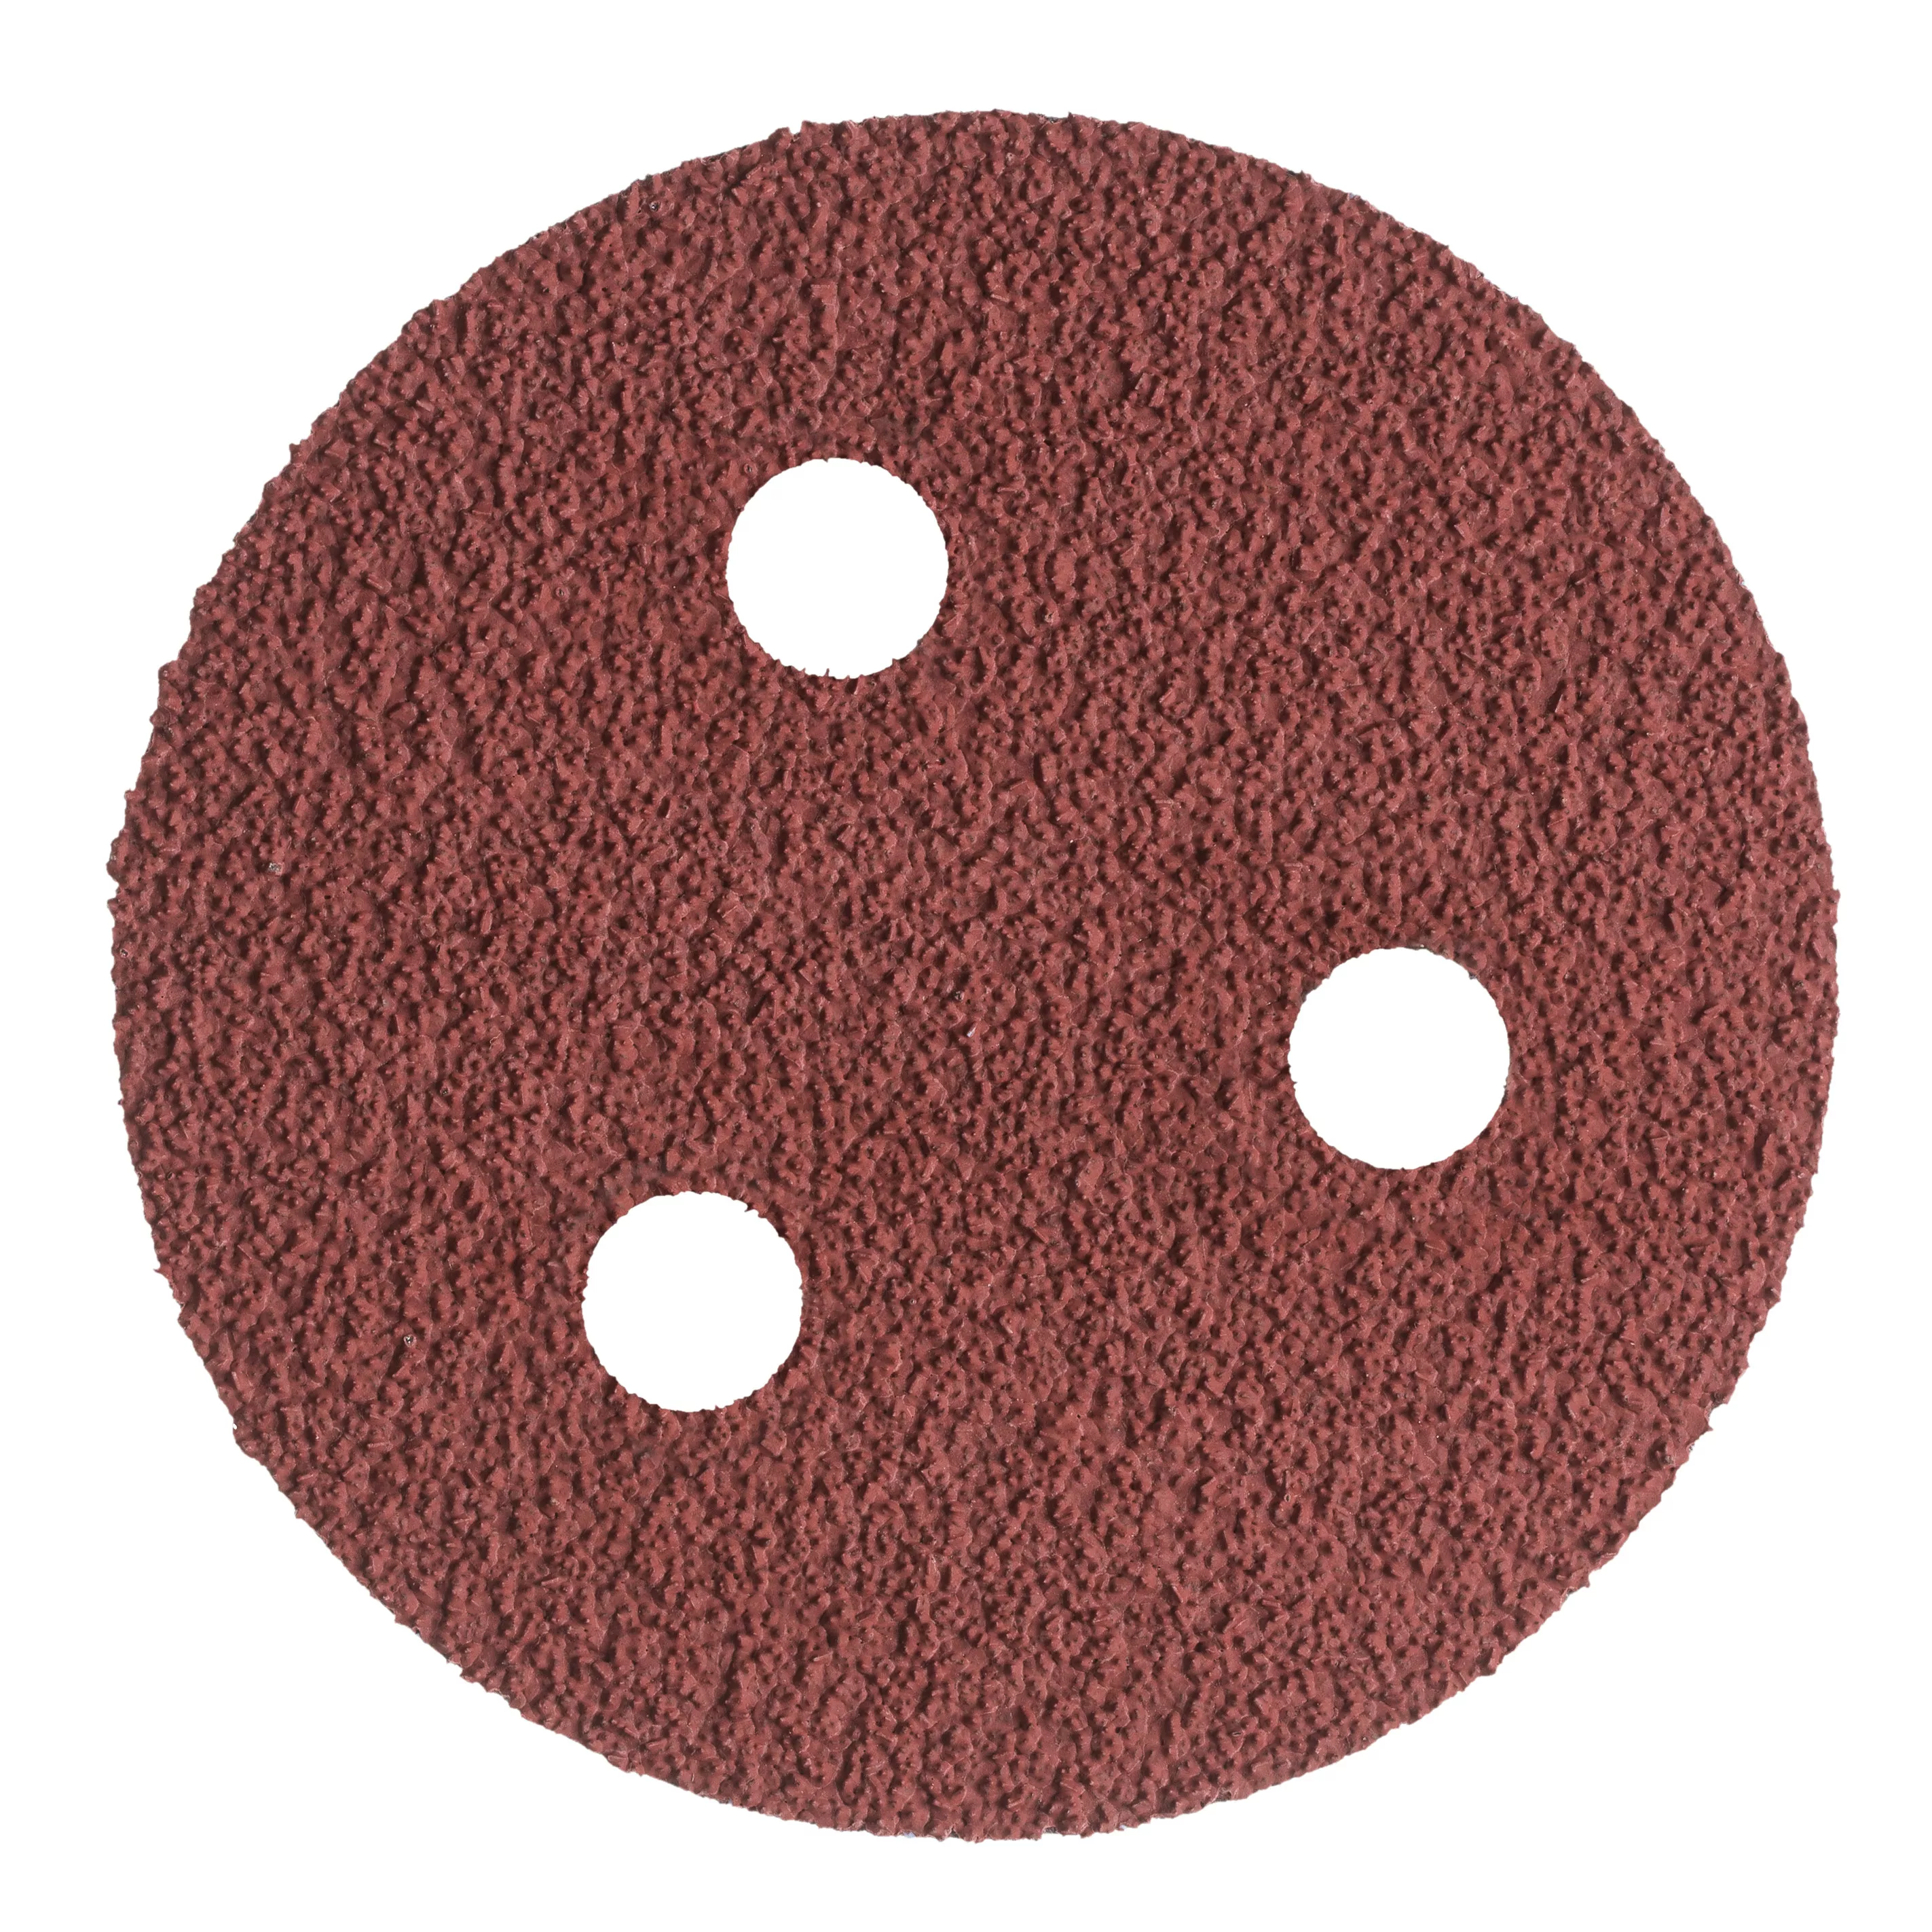 3M™ Cubitron™ II Hookit™ Cloth Disc 947A, 40+ X-weight, 3 in x NH, D/F
3HL, Die 300BE, 25/Carton, 200 ea/Case